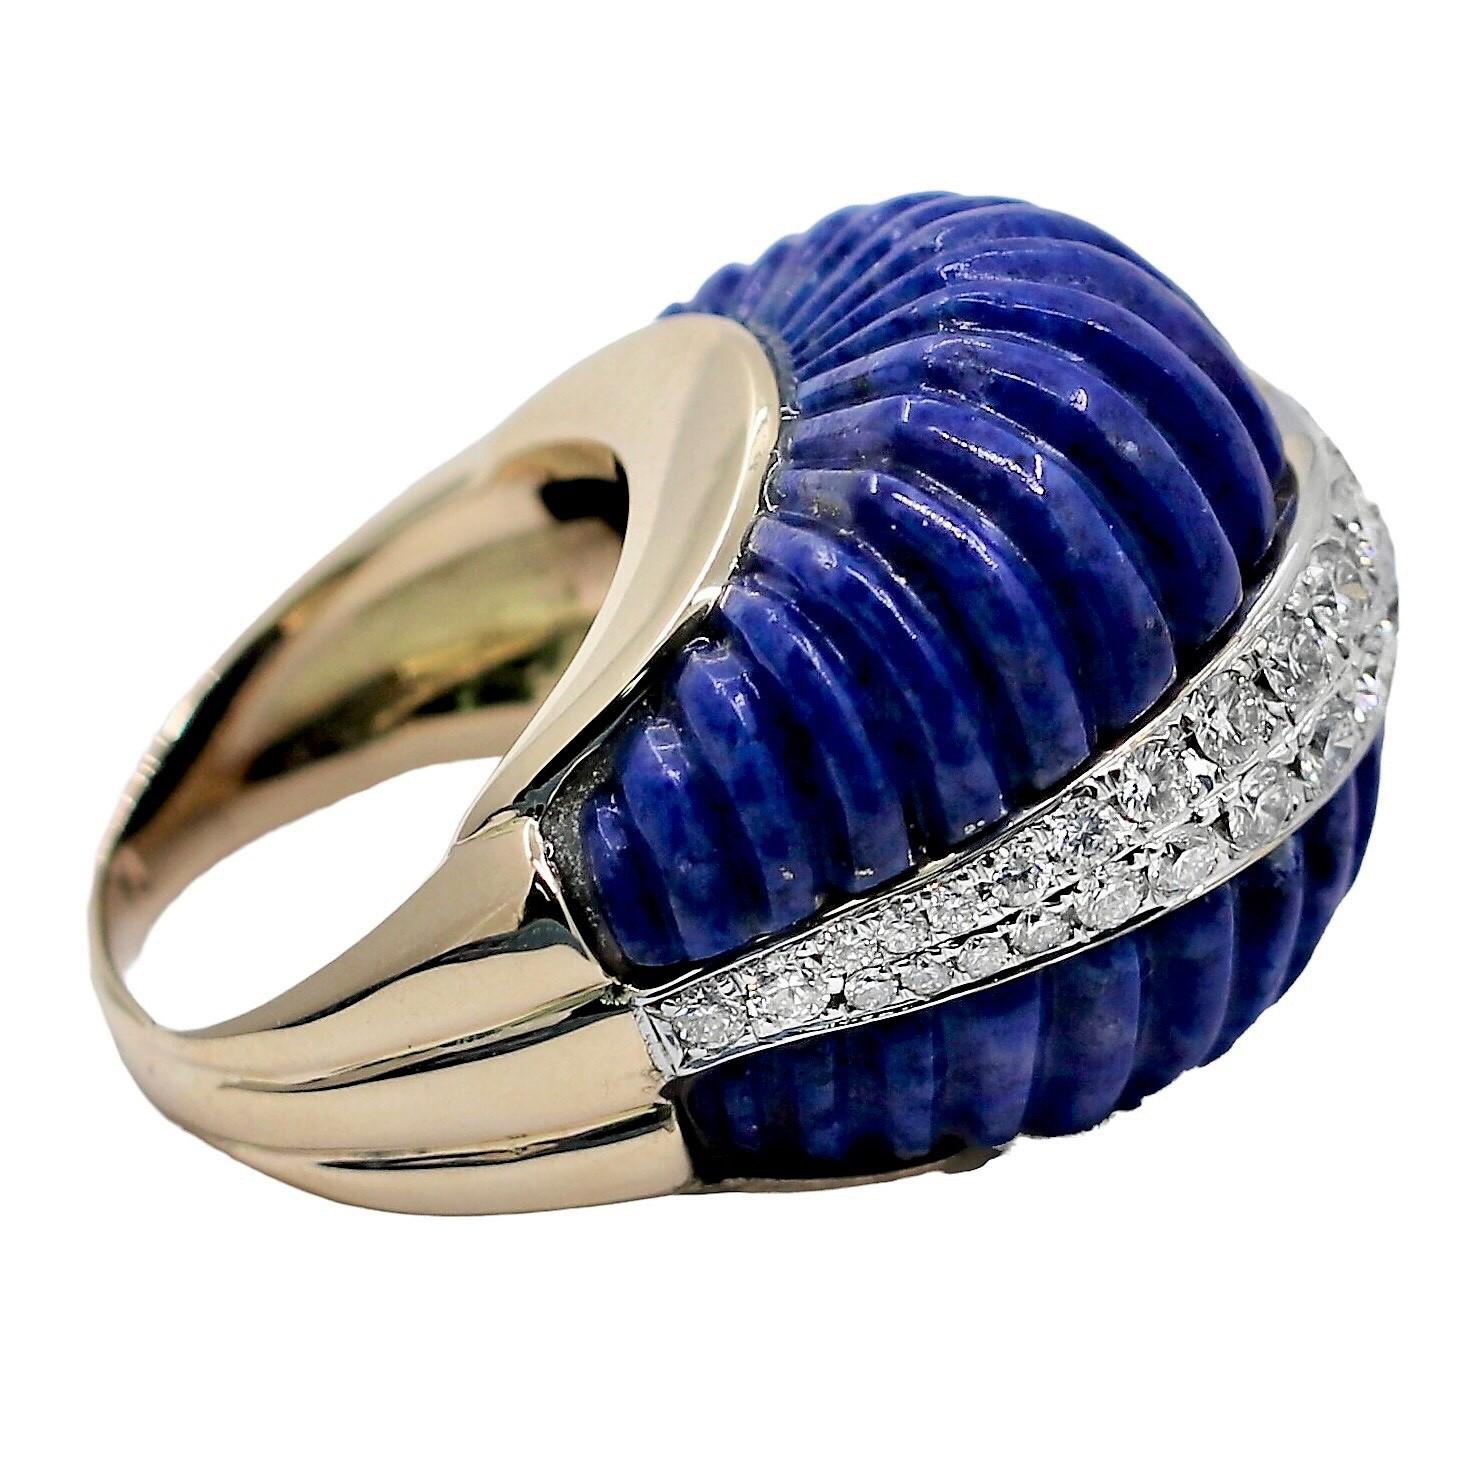 Women's Big and Bold Vintage Yellow Gold, Fluted Lapis-Lazuli and Diamond Dome Ring.